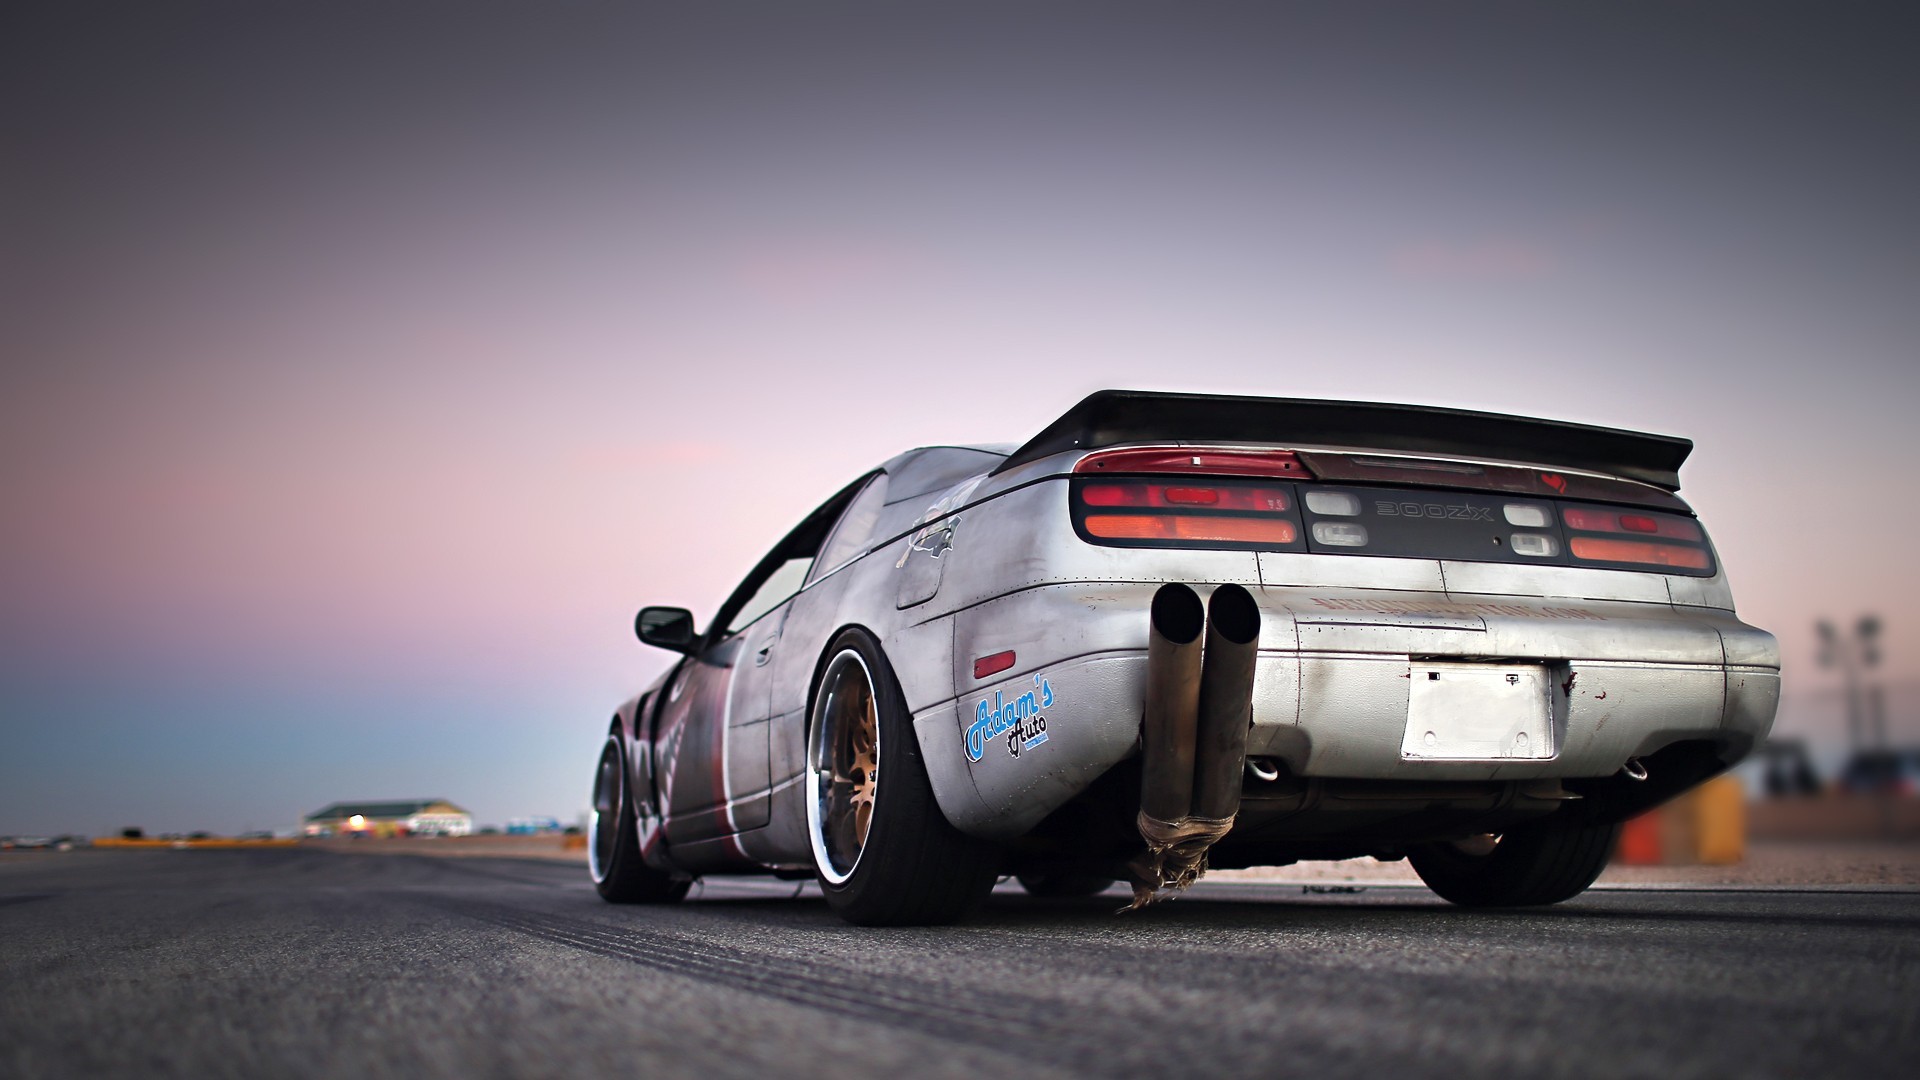 Nissan 300ZX, Car, Tuning, Drift, Stance, Speedhunters Wallpapers HD